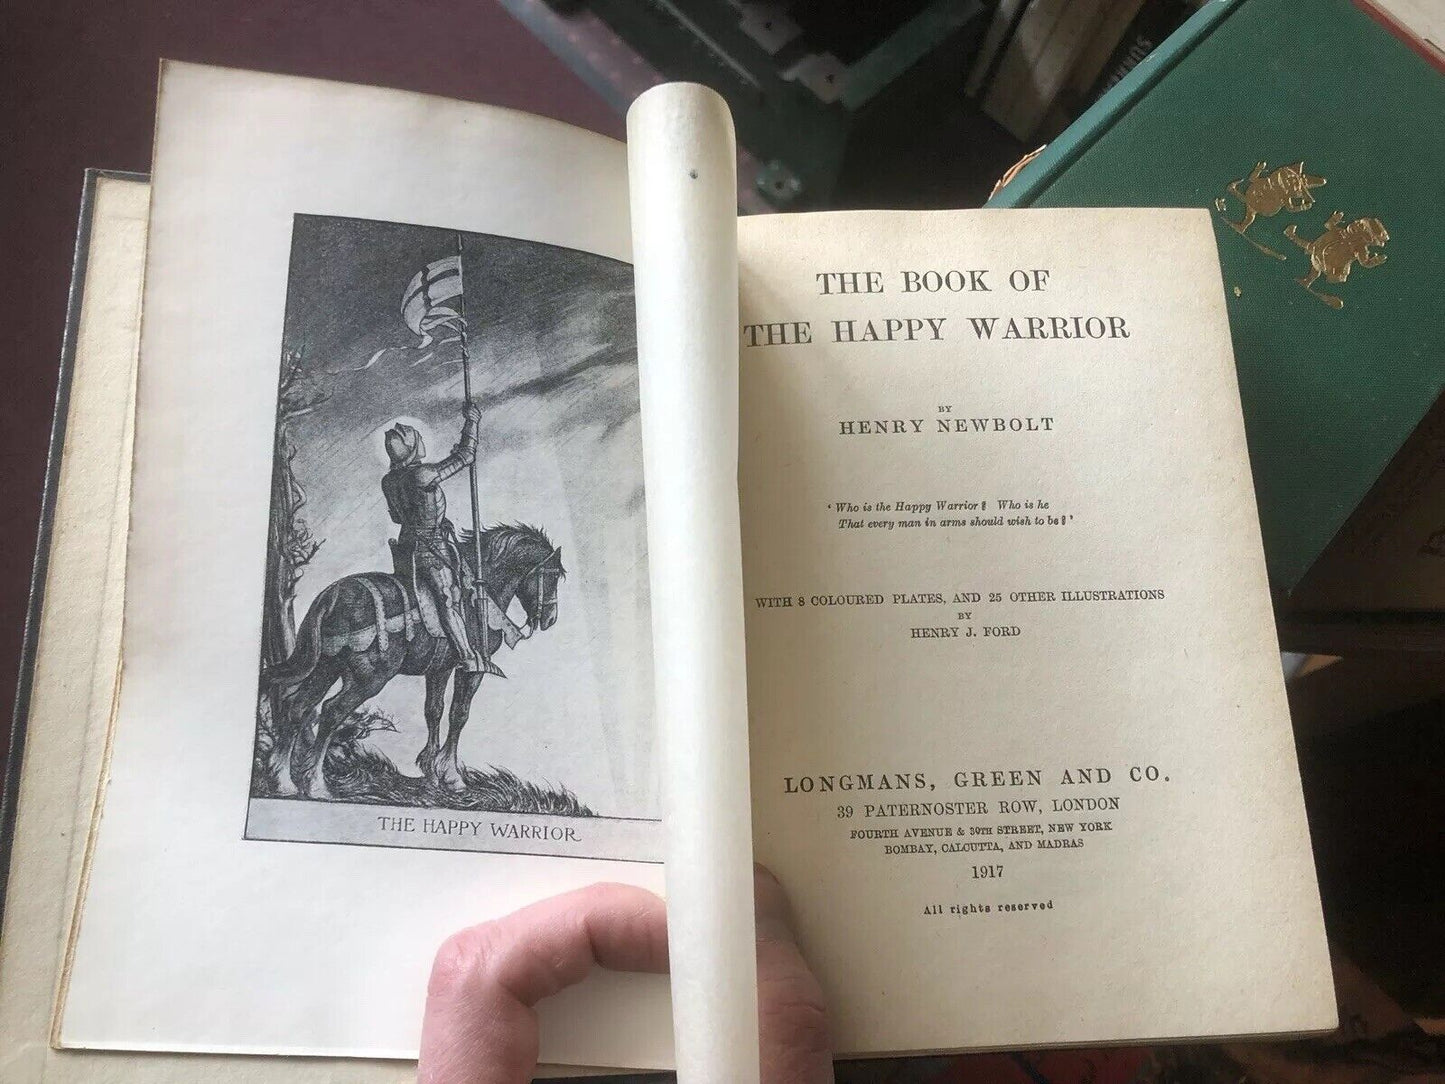 The Book of the Happy Warrior - Tales of Chivalry - Robin Hood Chevalier Bayard